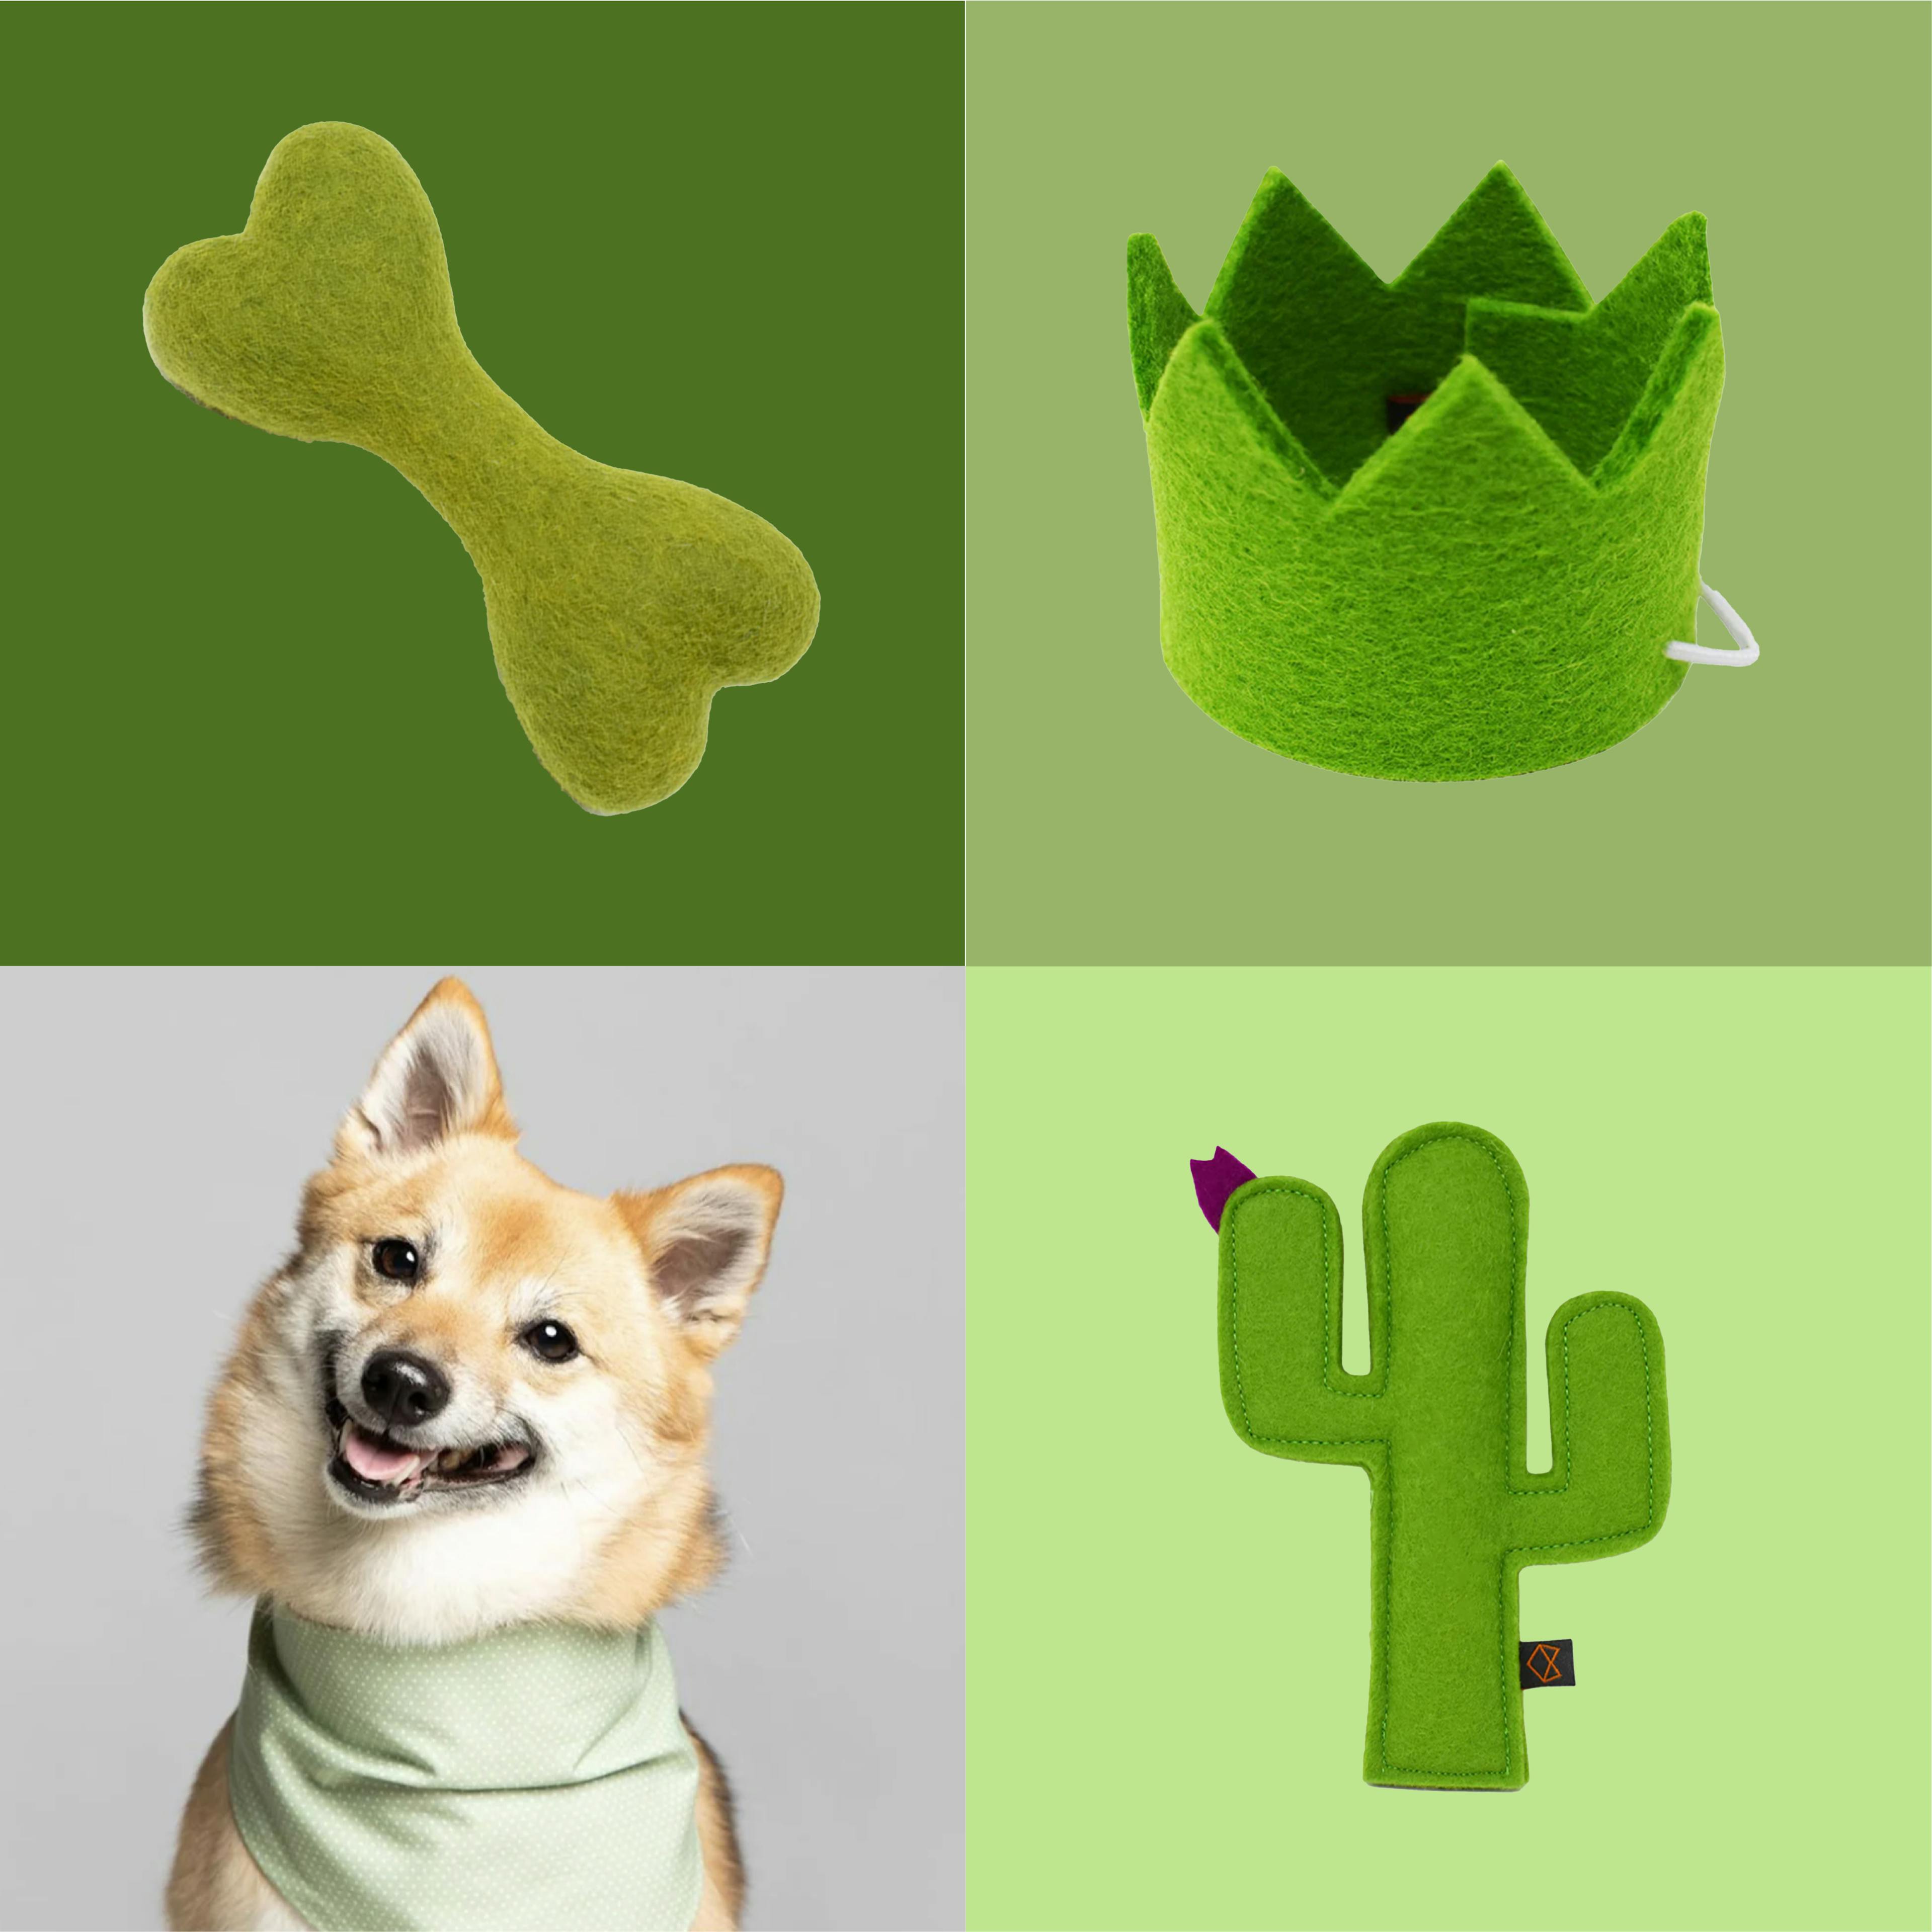 St. Patrick's Day Pet Gift Guide